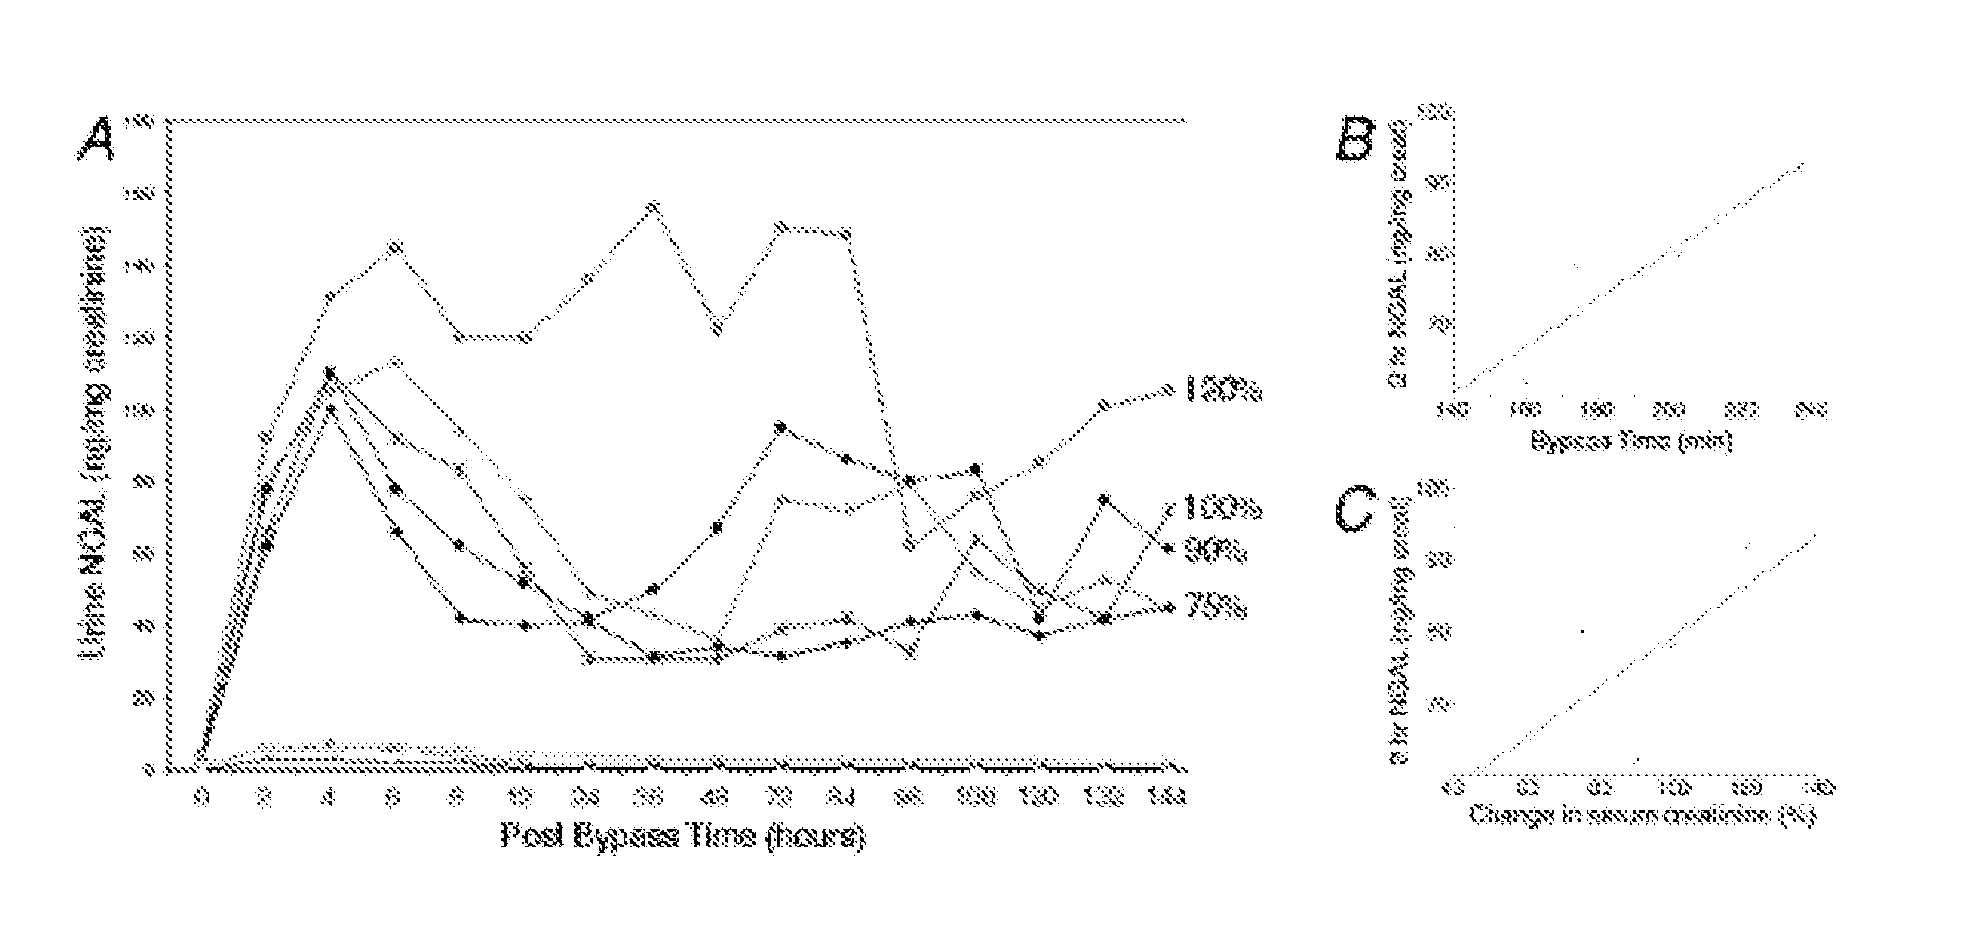 Method and kit for detecting the early onset of renal tubular cell injury